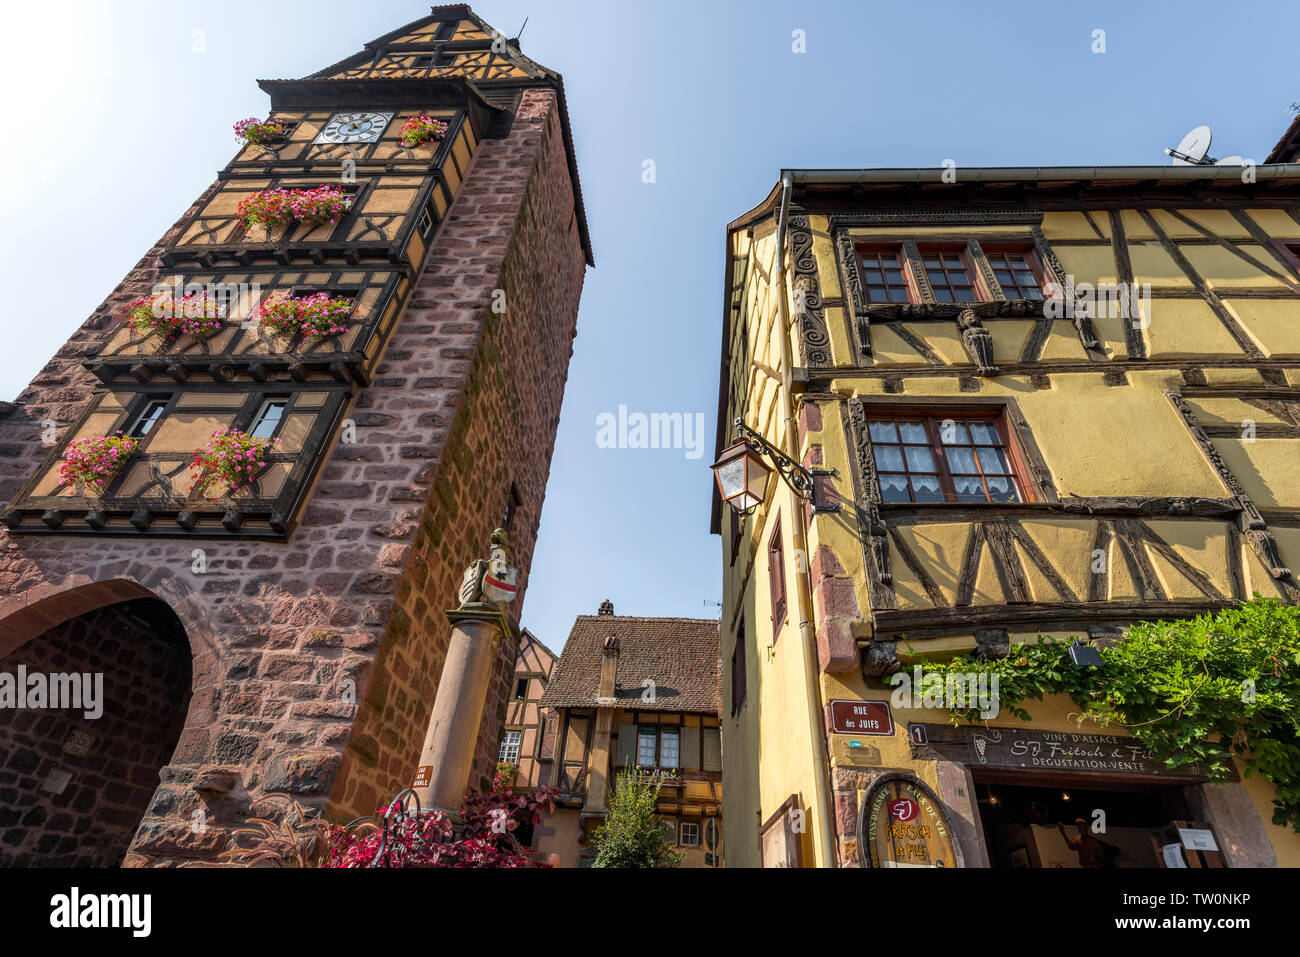 old town gate and framework, Riquewihr, Alsace, France, historical picturesque village Stock Photo